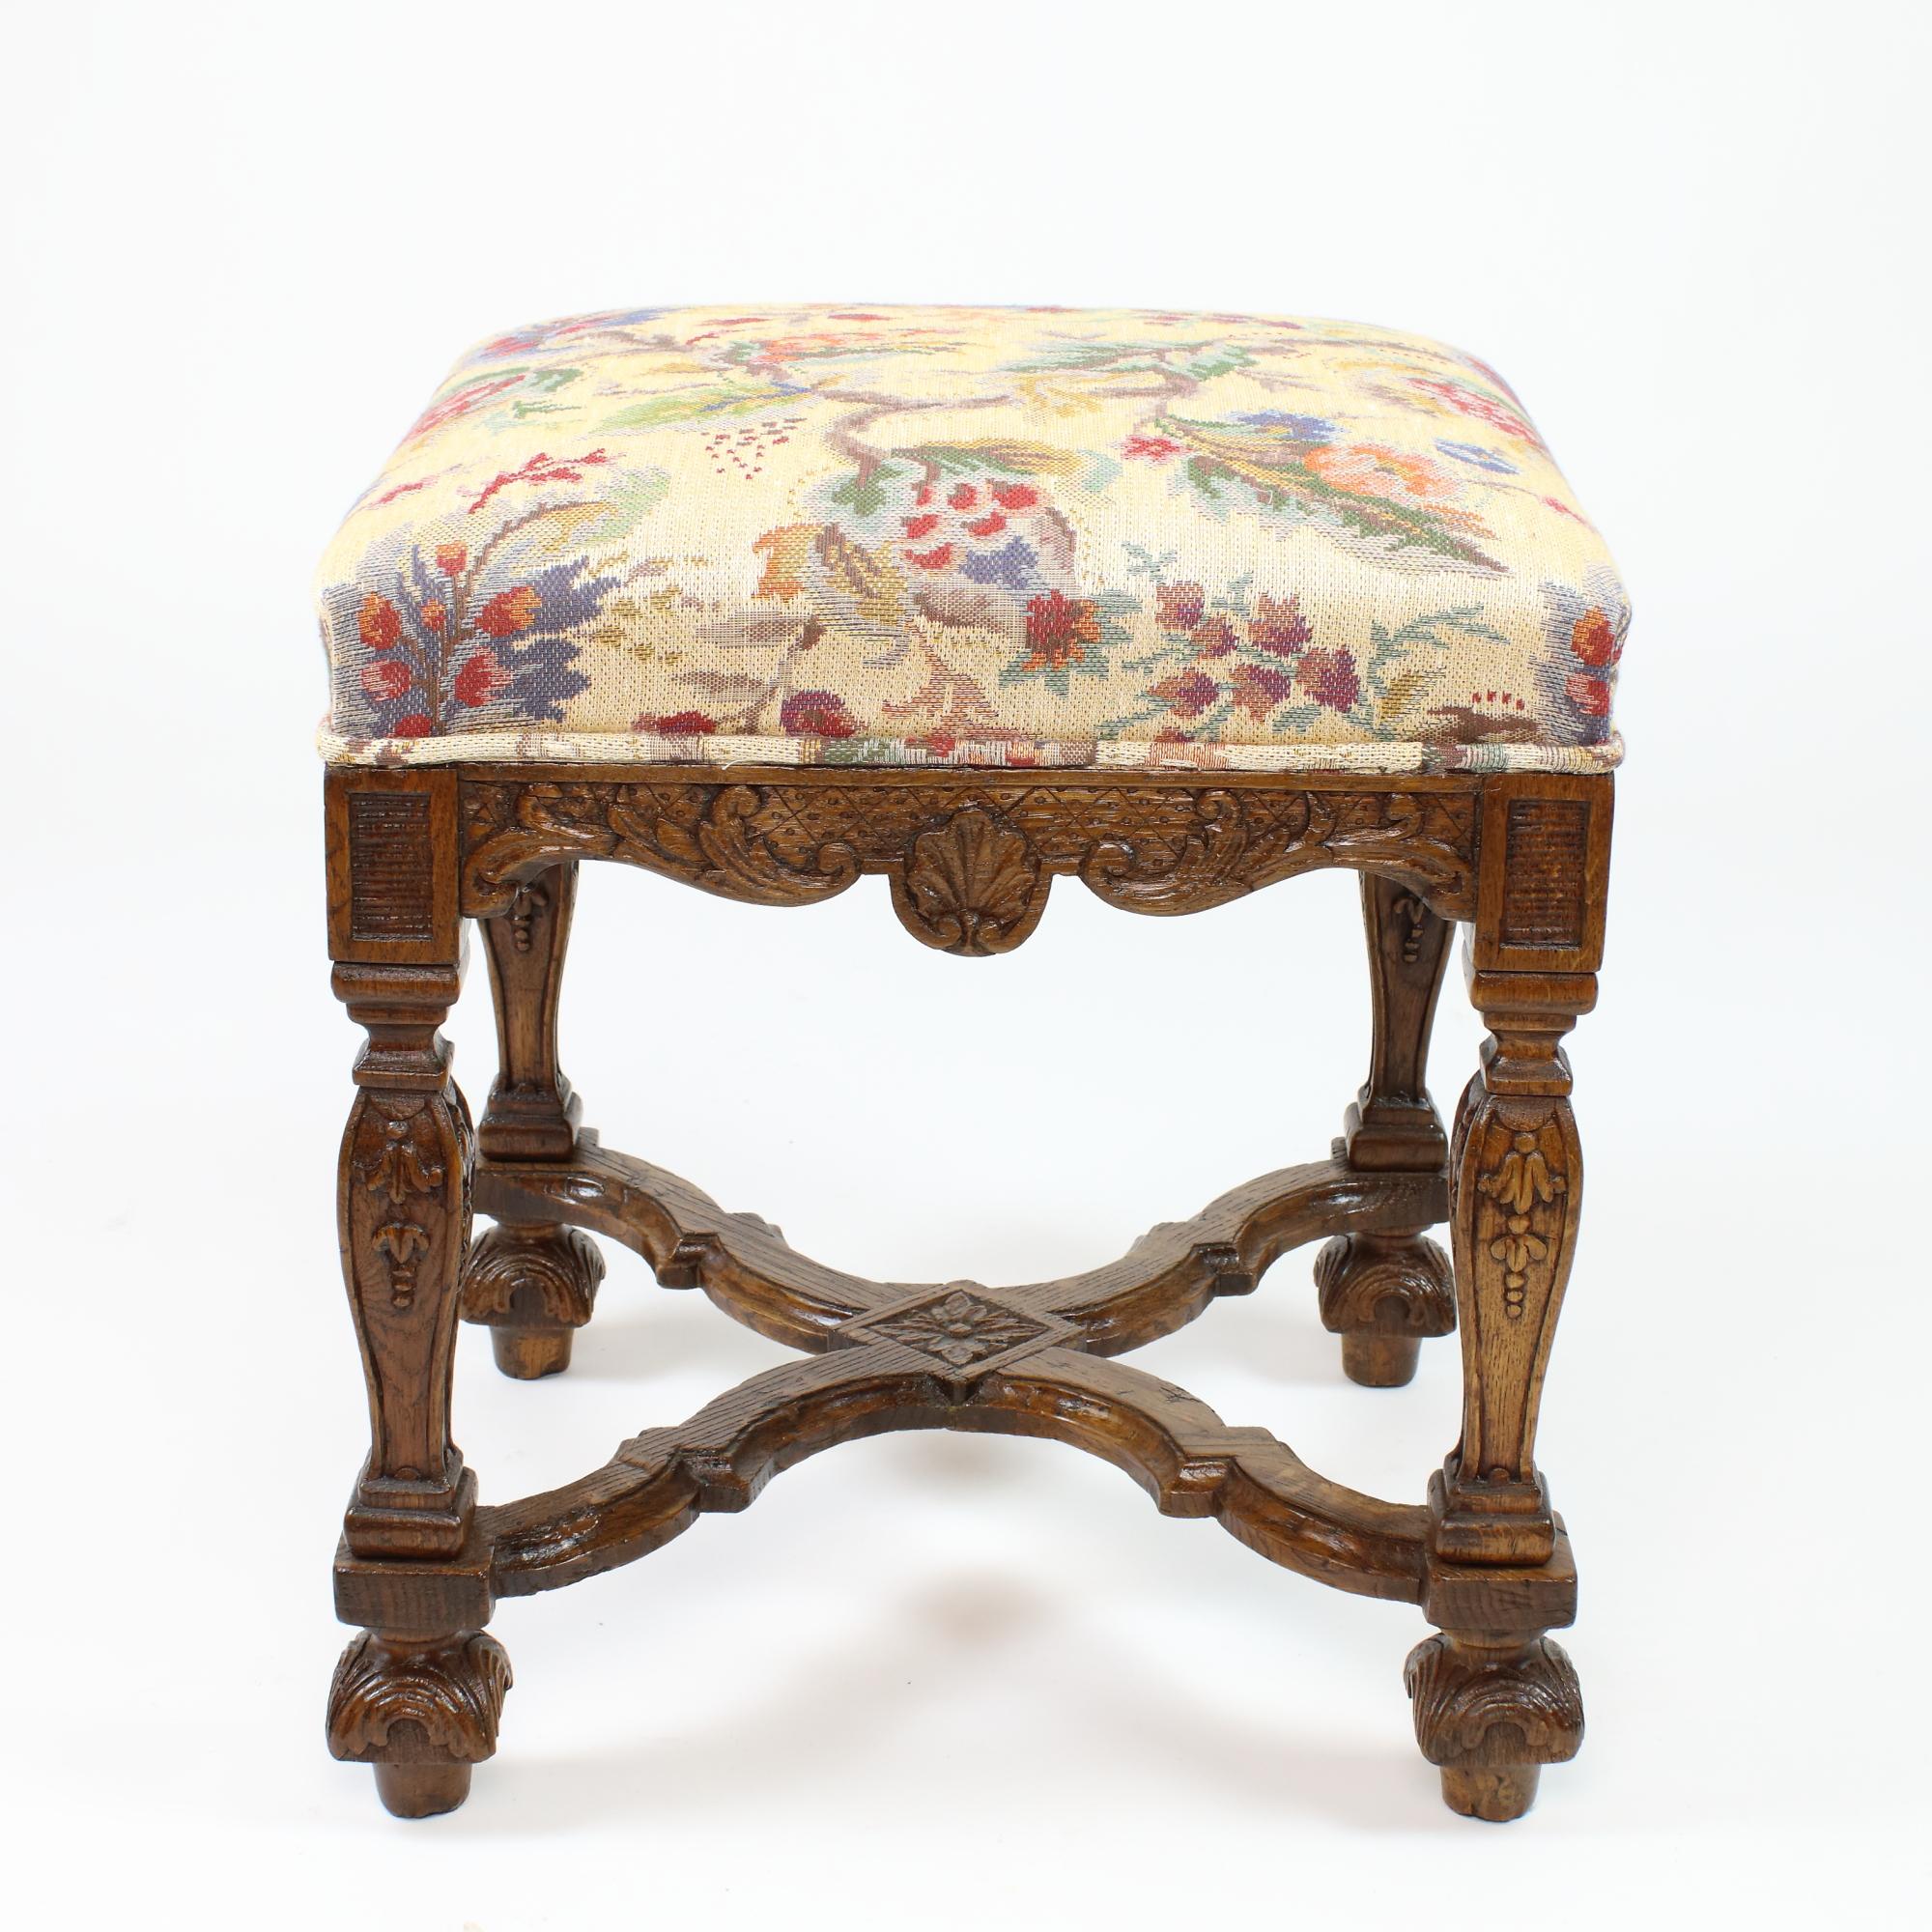 Early 18th Century French Louis XIV/Régence Carved Oak Stool or Tabouret For Sale 1